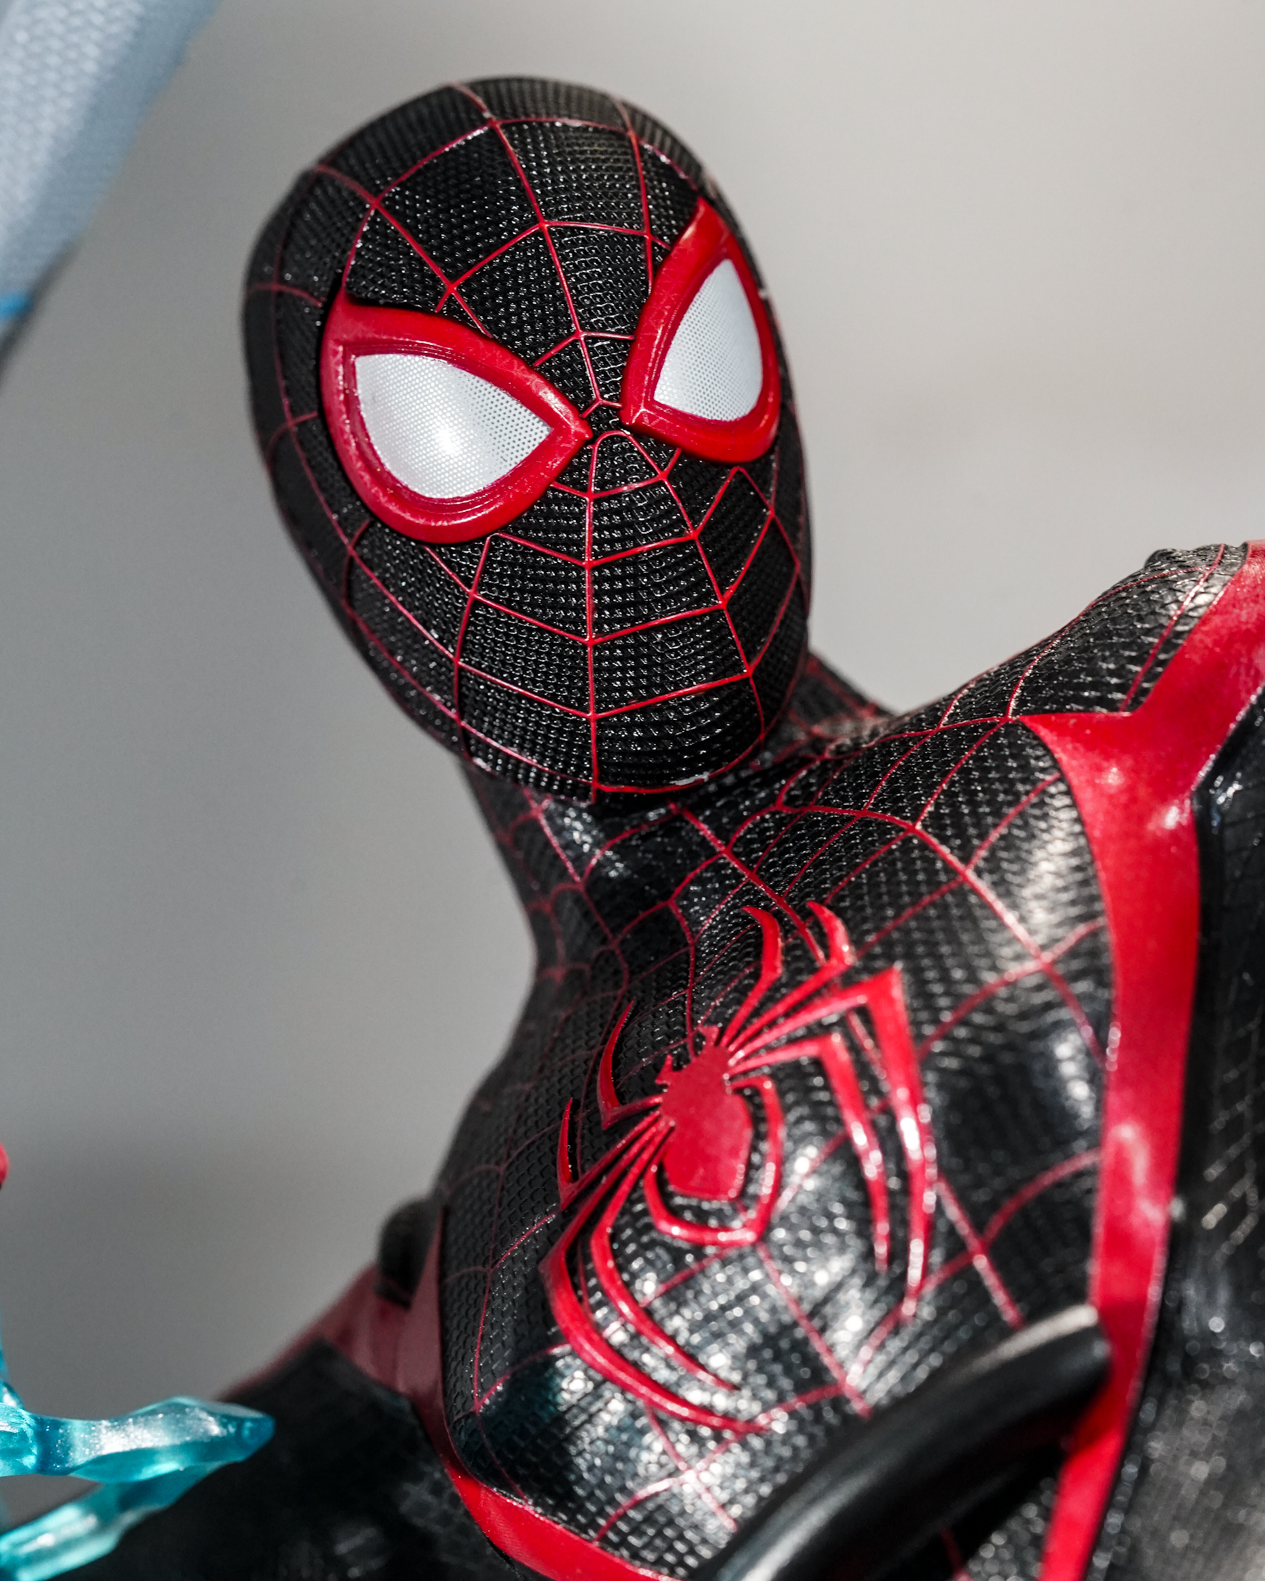 SPIDER-MAN ACTION FIGURE - THE TOY STORE